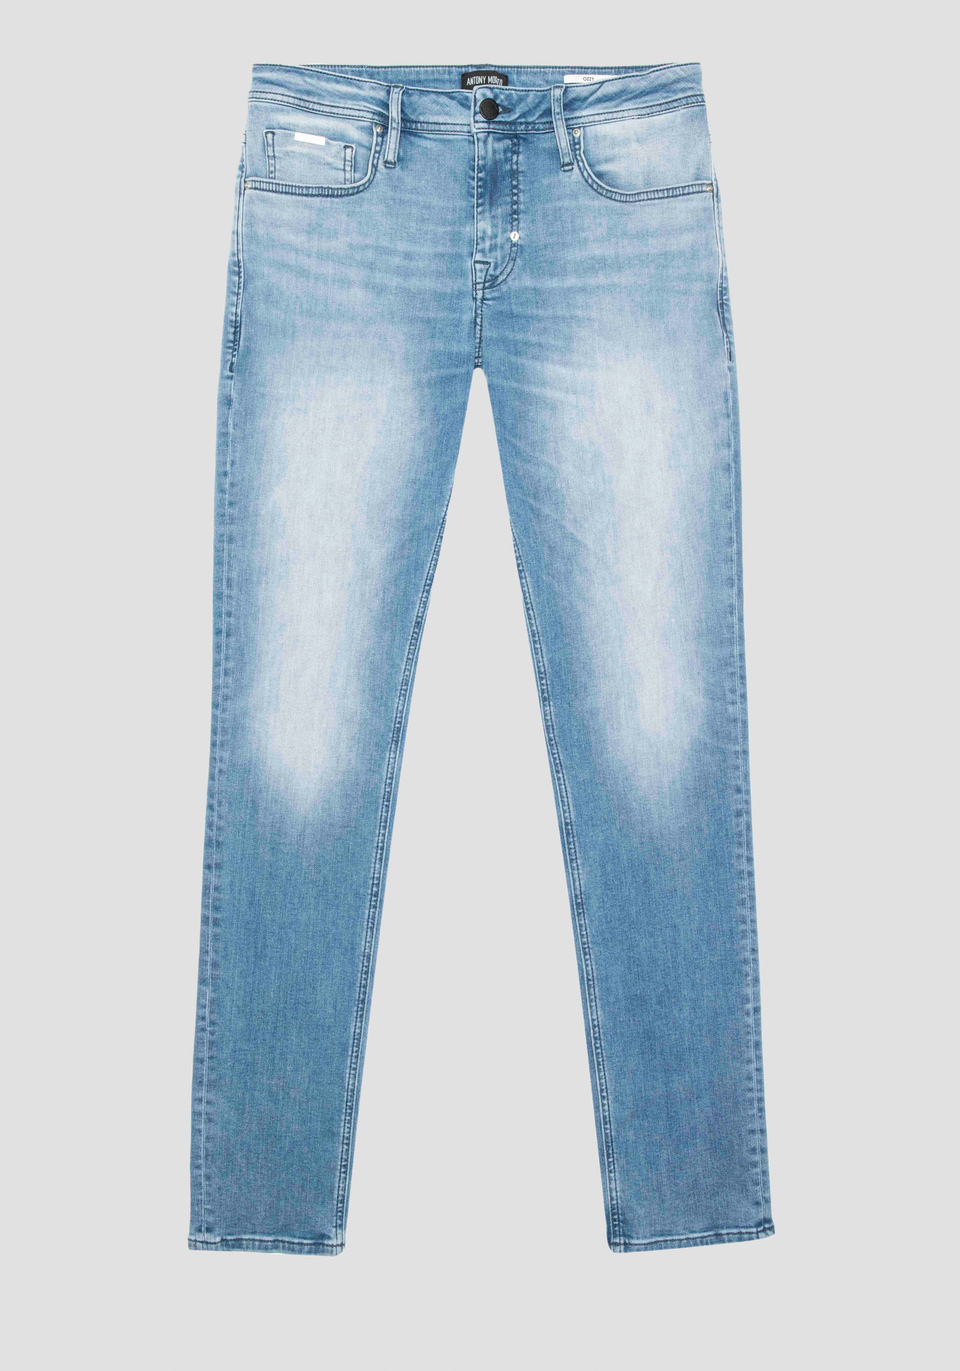 TAPERED FIT "OZZY" JEANS IN POWER STRETCH DENIM WITH USED EFFECT - Antony Morato Online Shop